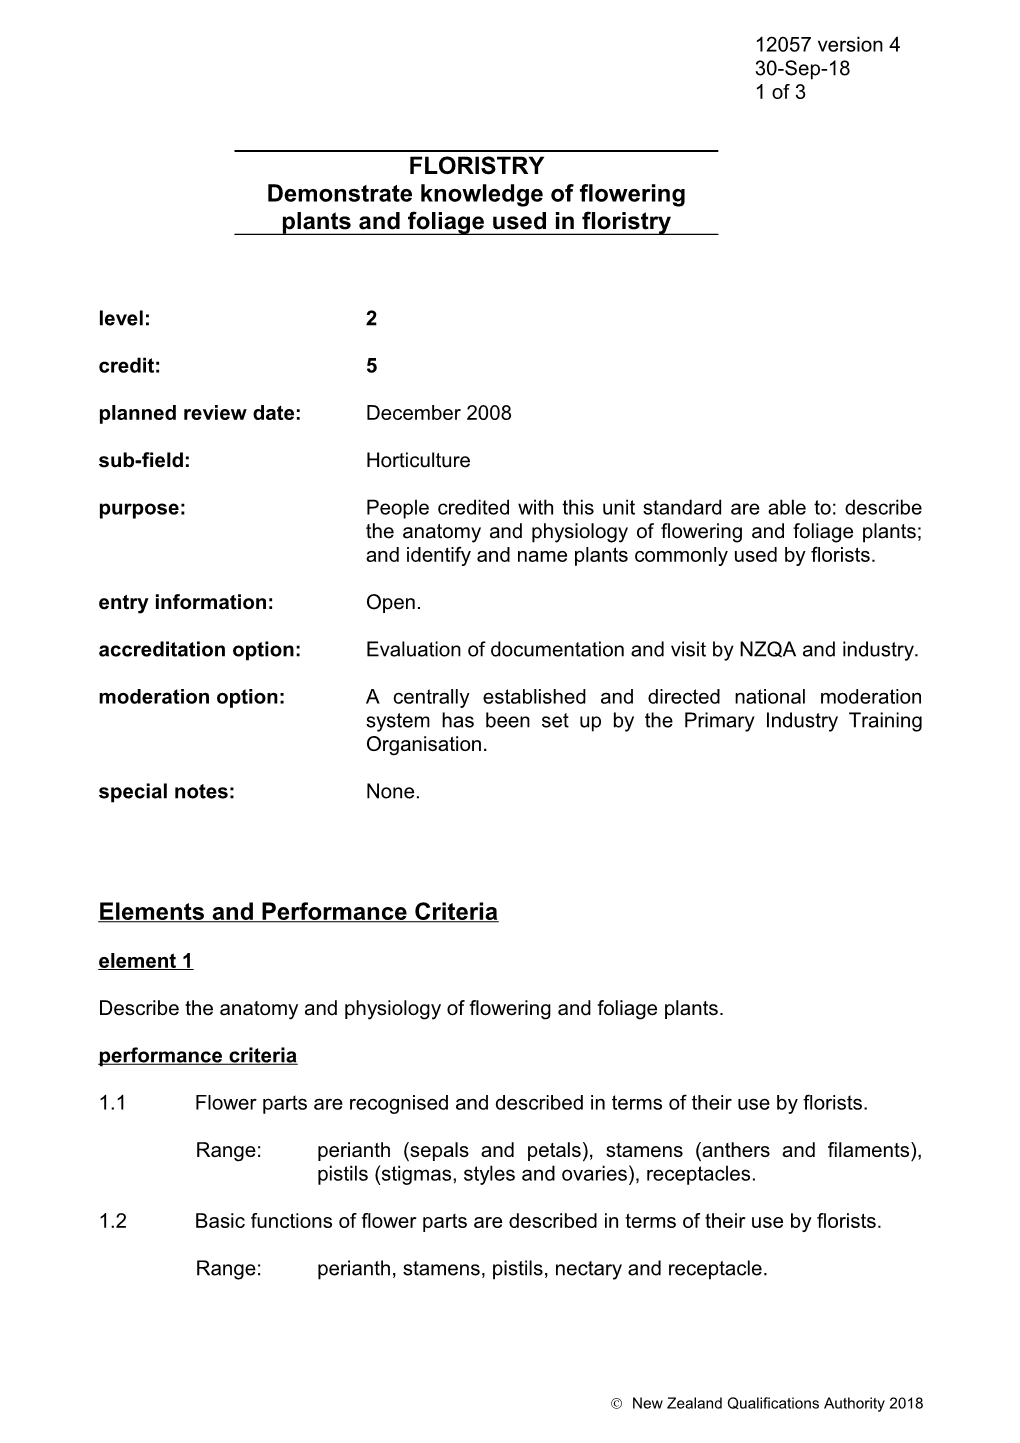 Planned Review Date: December 2008